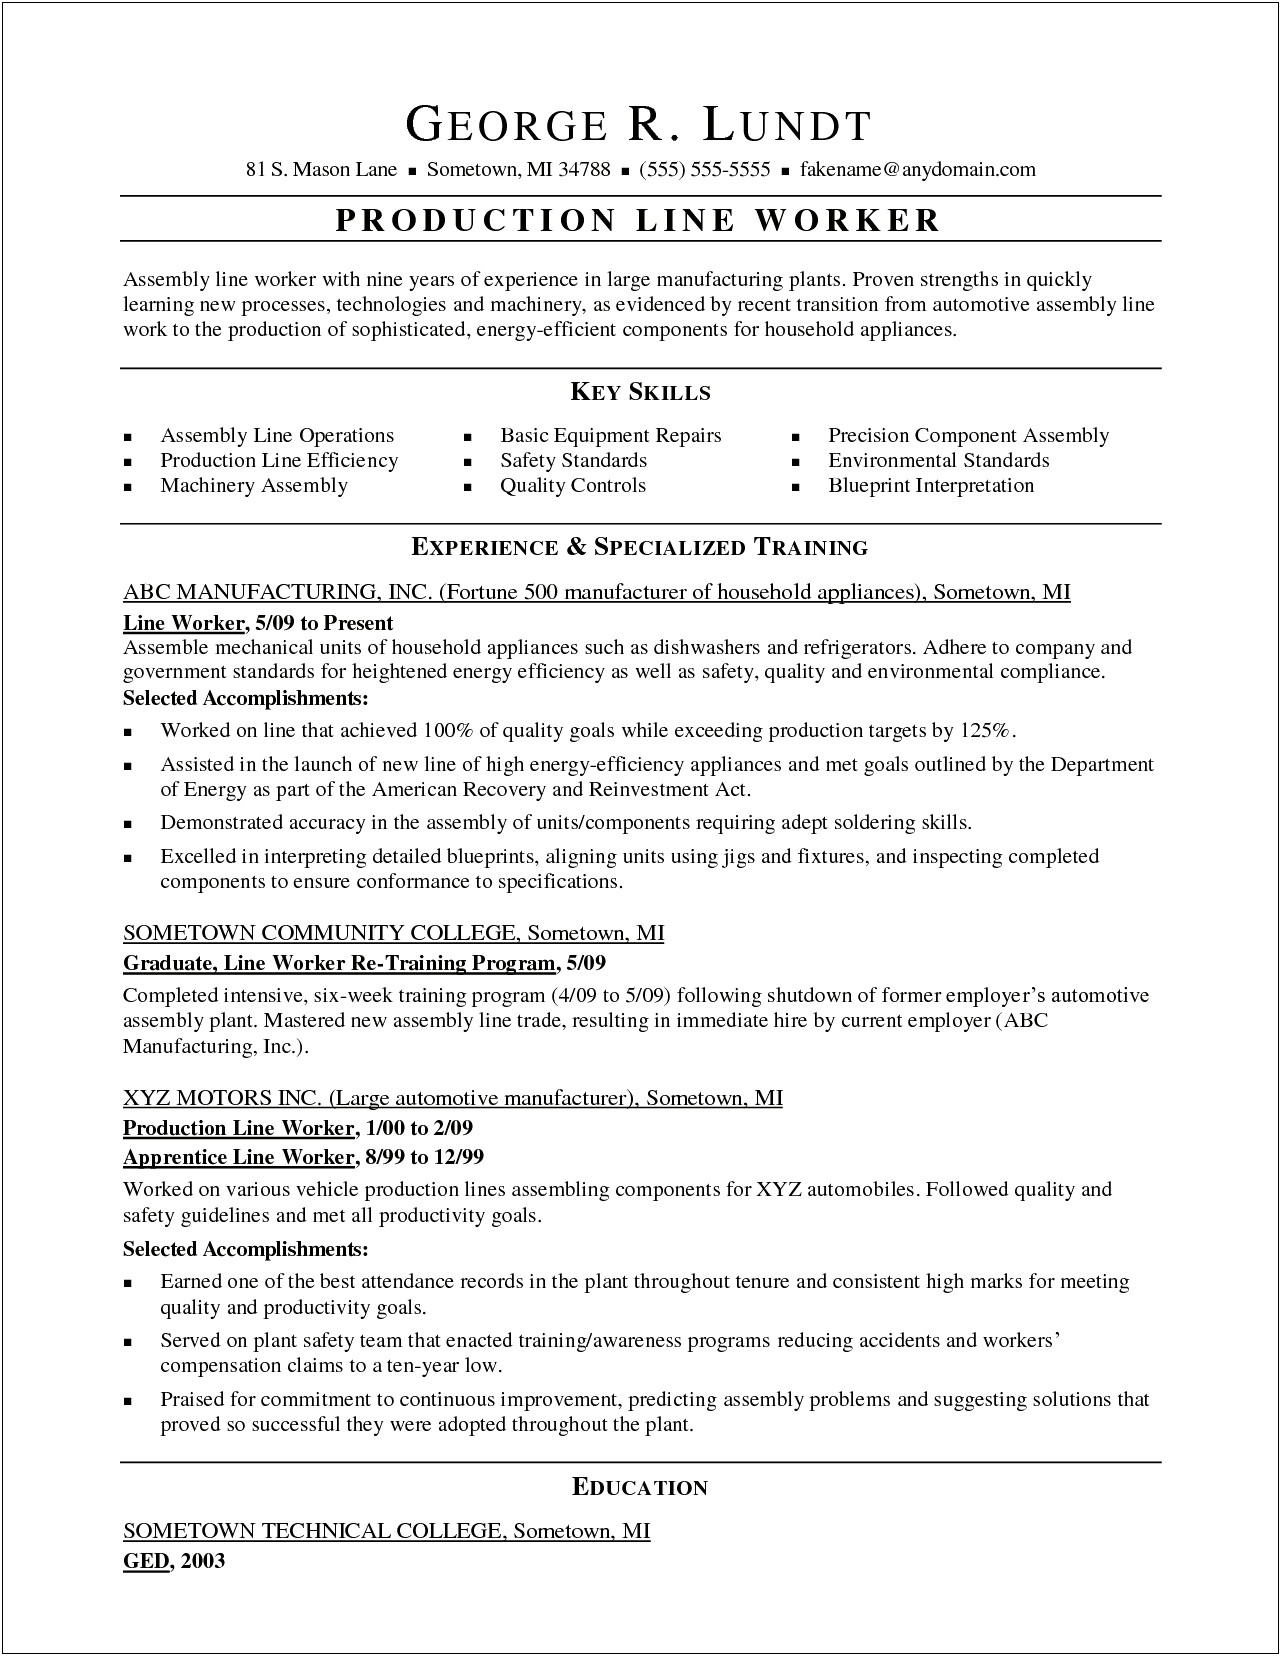 Resume To Work In A Factory